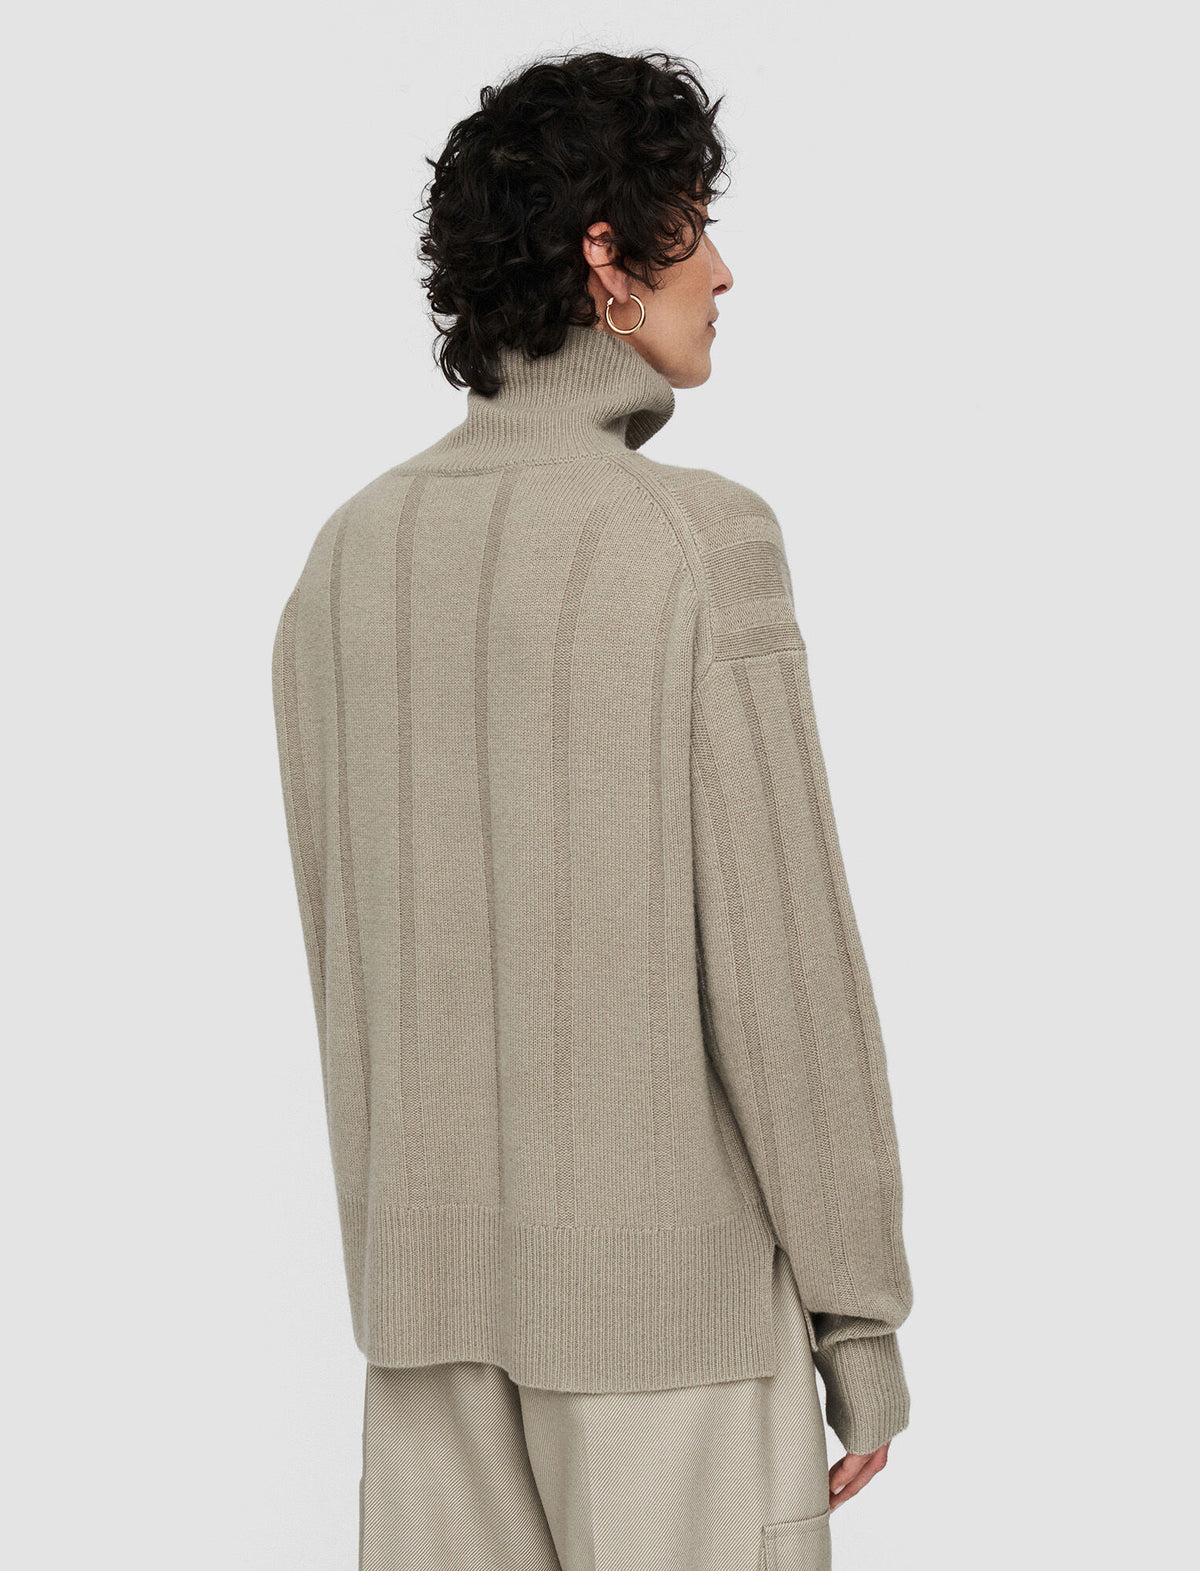 JOSEPH 6592 Rib Pure Cashmere Knit in Pewter